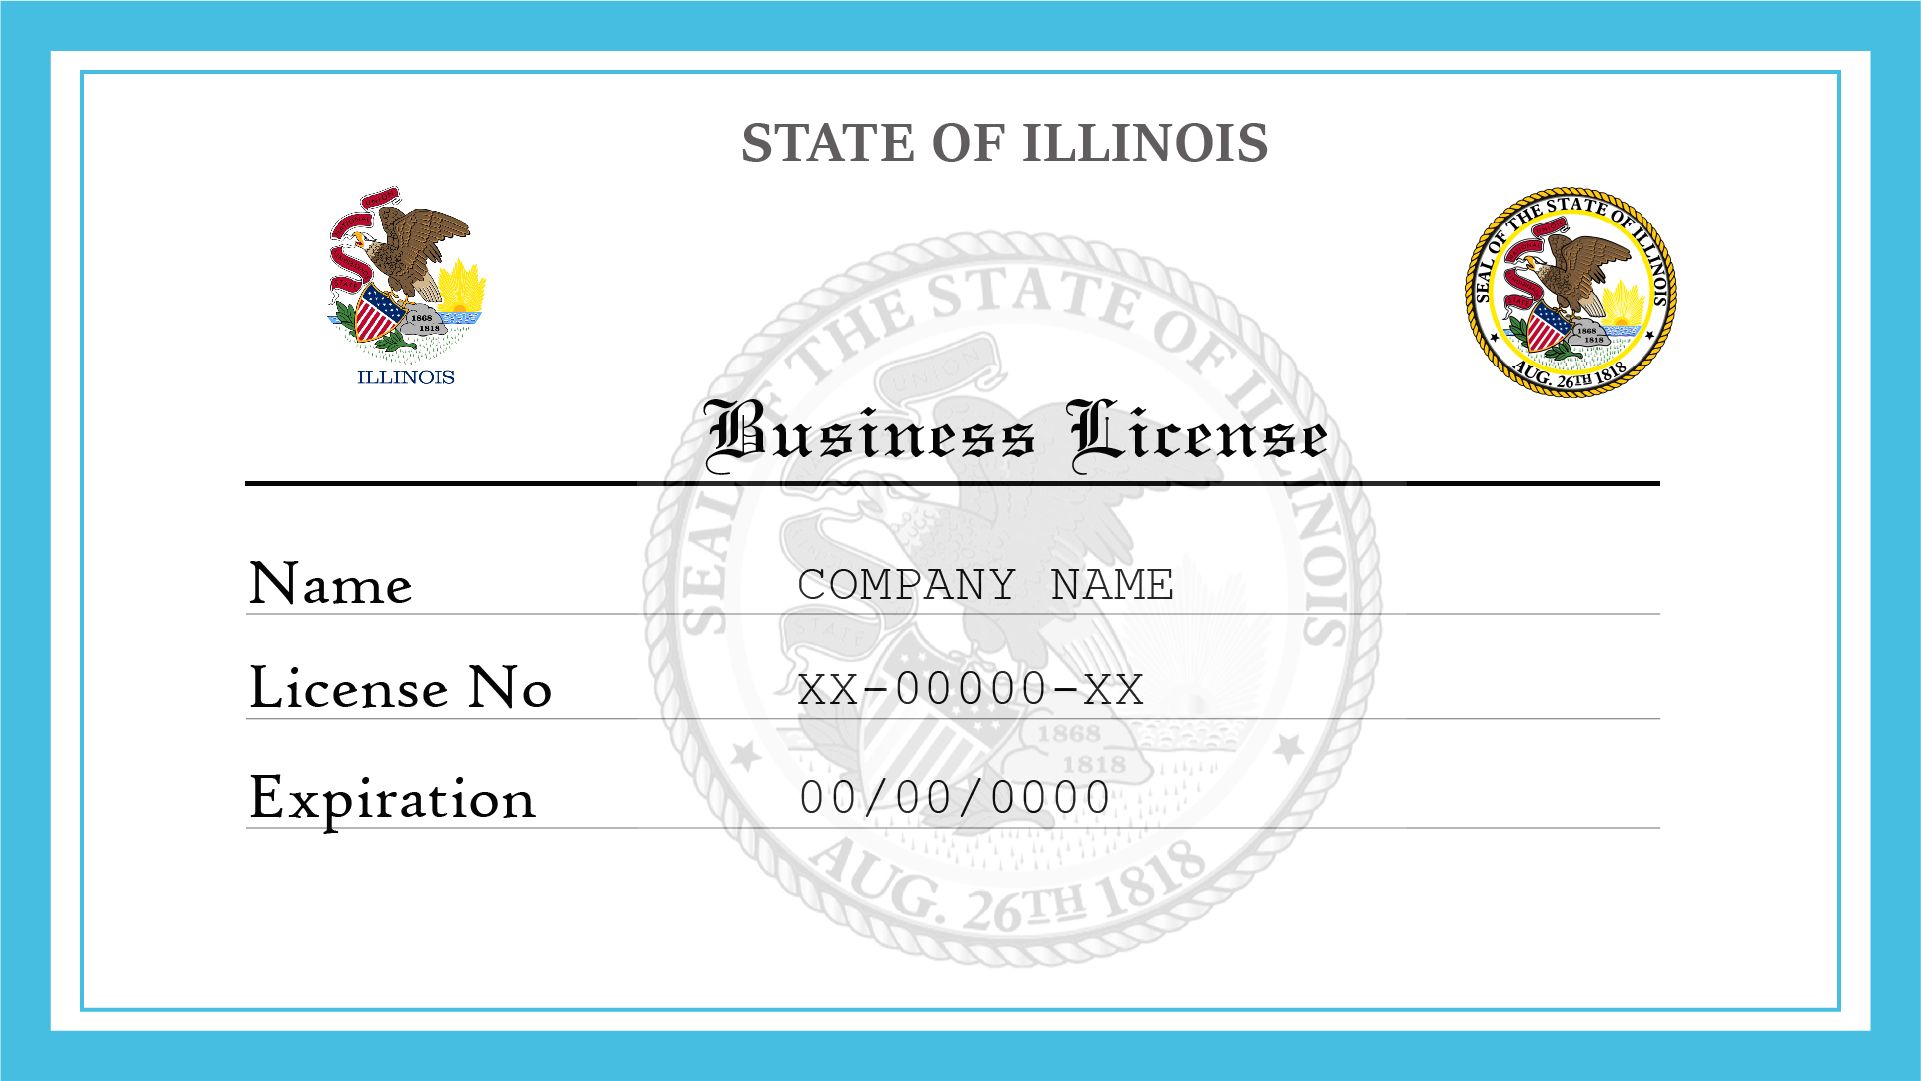 illinois-business-license-license-lookup